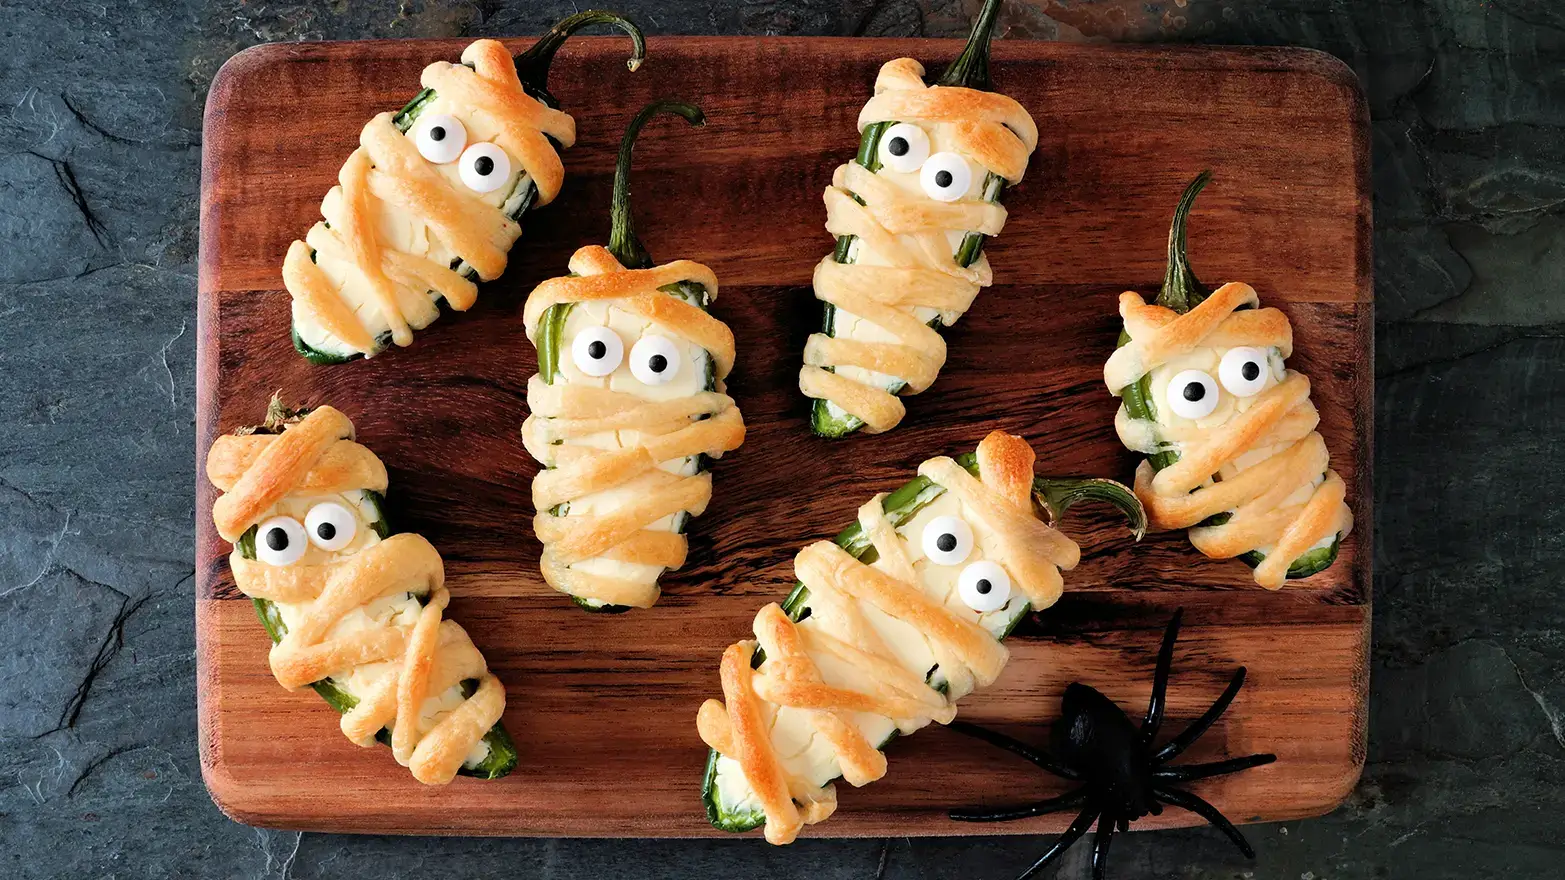 Jalapeno poppers  wrapped in pastry dough with edible eyeballs